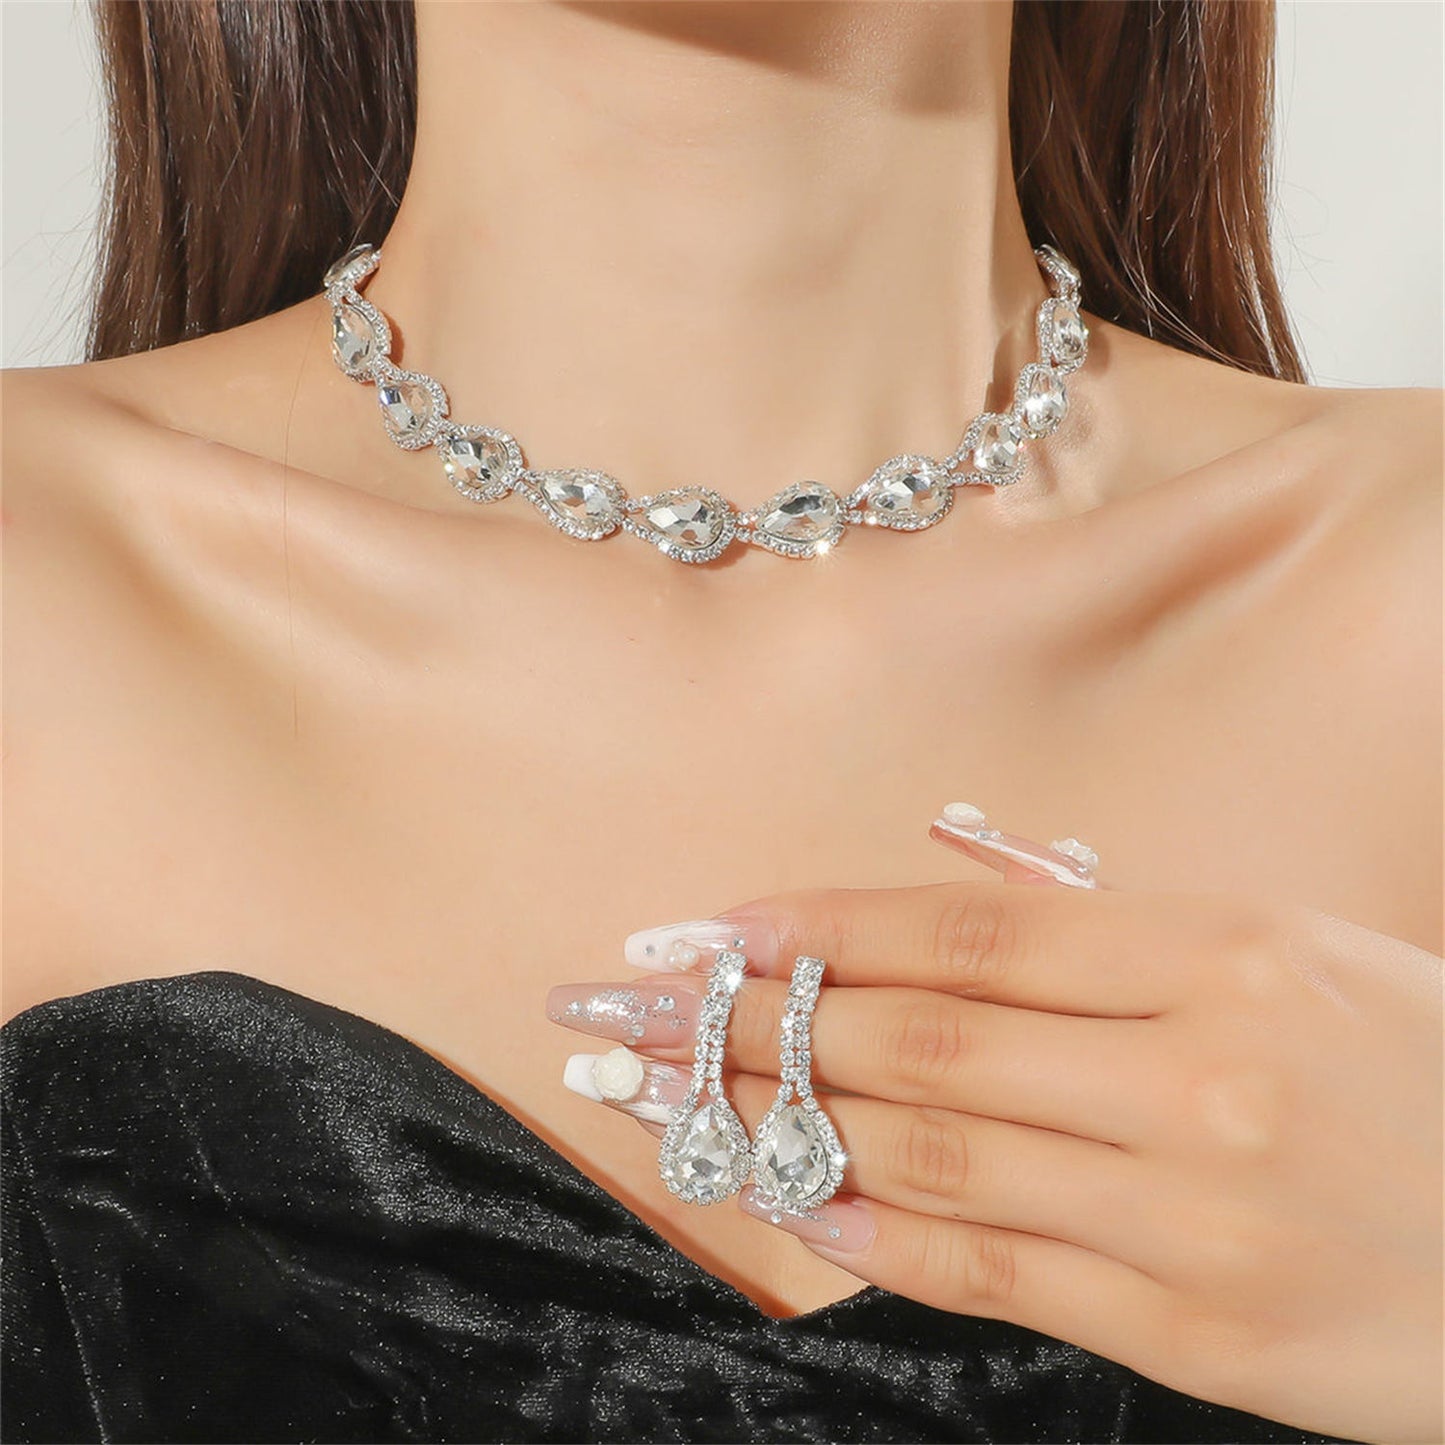 Fashion Woven Rhinestone Clavicle Bridal Jewelry Necklace And Earrings Set